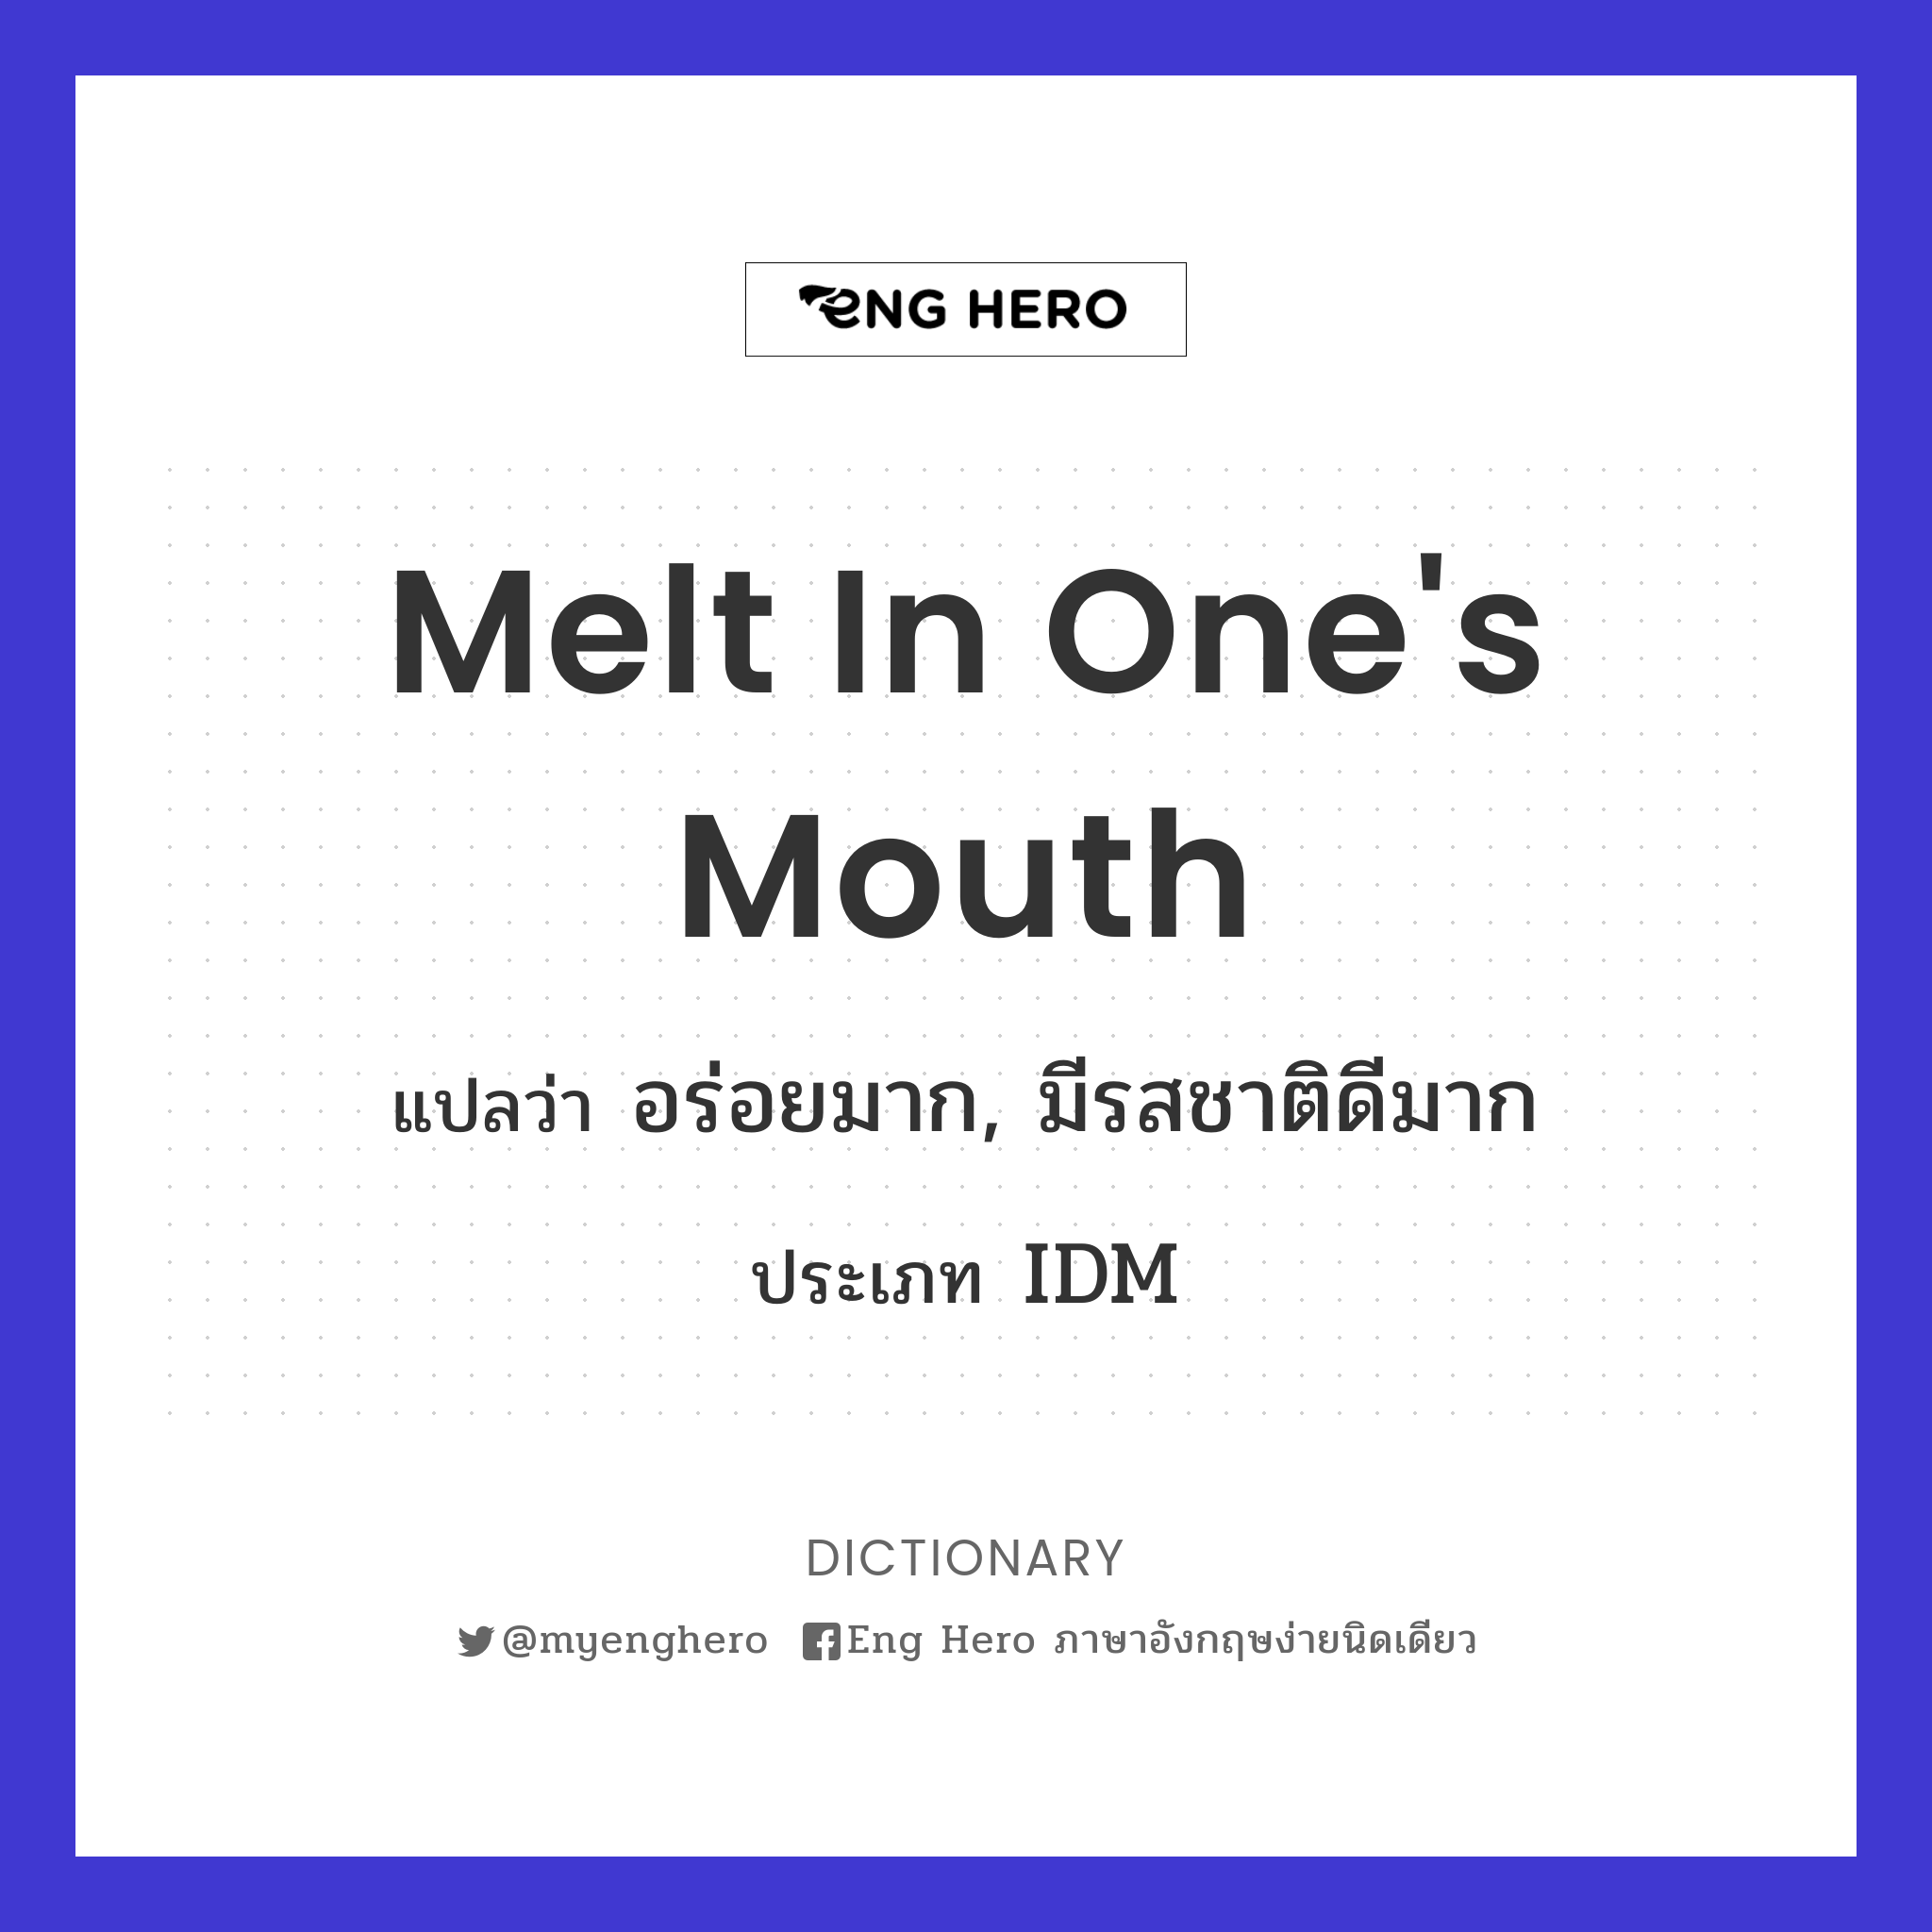 melt in one's mouth